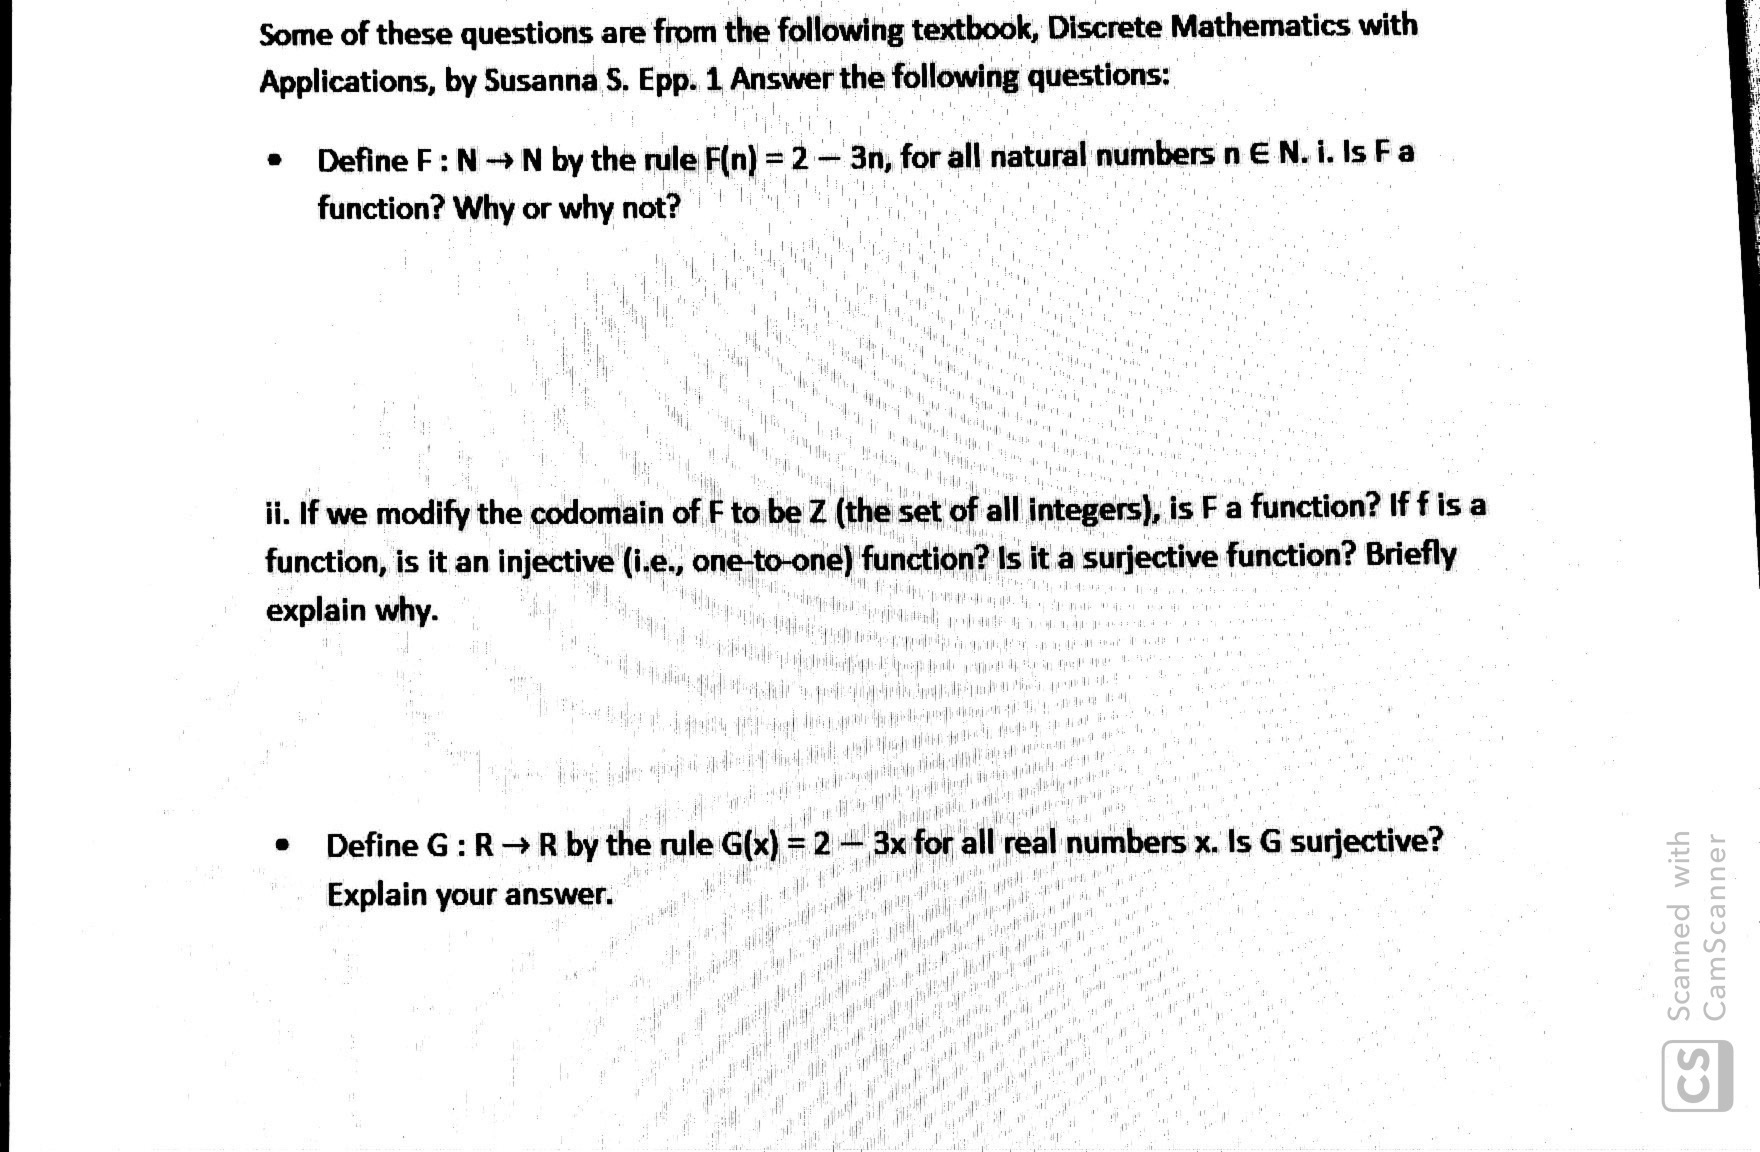 Some of these questions are from the following textbook, Discrete Mathematics with
Applications, by Susanna S. Epp. 1 Answer the following questions:
Define F: NN by the rule F(n) = 2-3n, for all natural numbers n E N. i. Is Fa
function? Why or why not?
&ihhe *** 4r152191
i. If we modify the codomain of F to be Z (the set of all integers), is F a function? If f is a
function, is it an injective (i.e., one-to-one) function? Is it a surjective function? Briefly
explain why.
PEWAY
I
44**# 4
p
Define G: RR by the rule G(x) = 2
3x for all real numbers x. Is G surjective?
Explain your answer.
/0. a #
,
CS Scanned with
CamScanner
